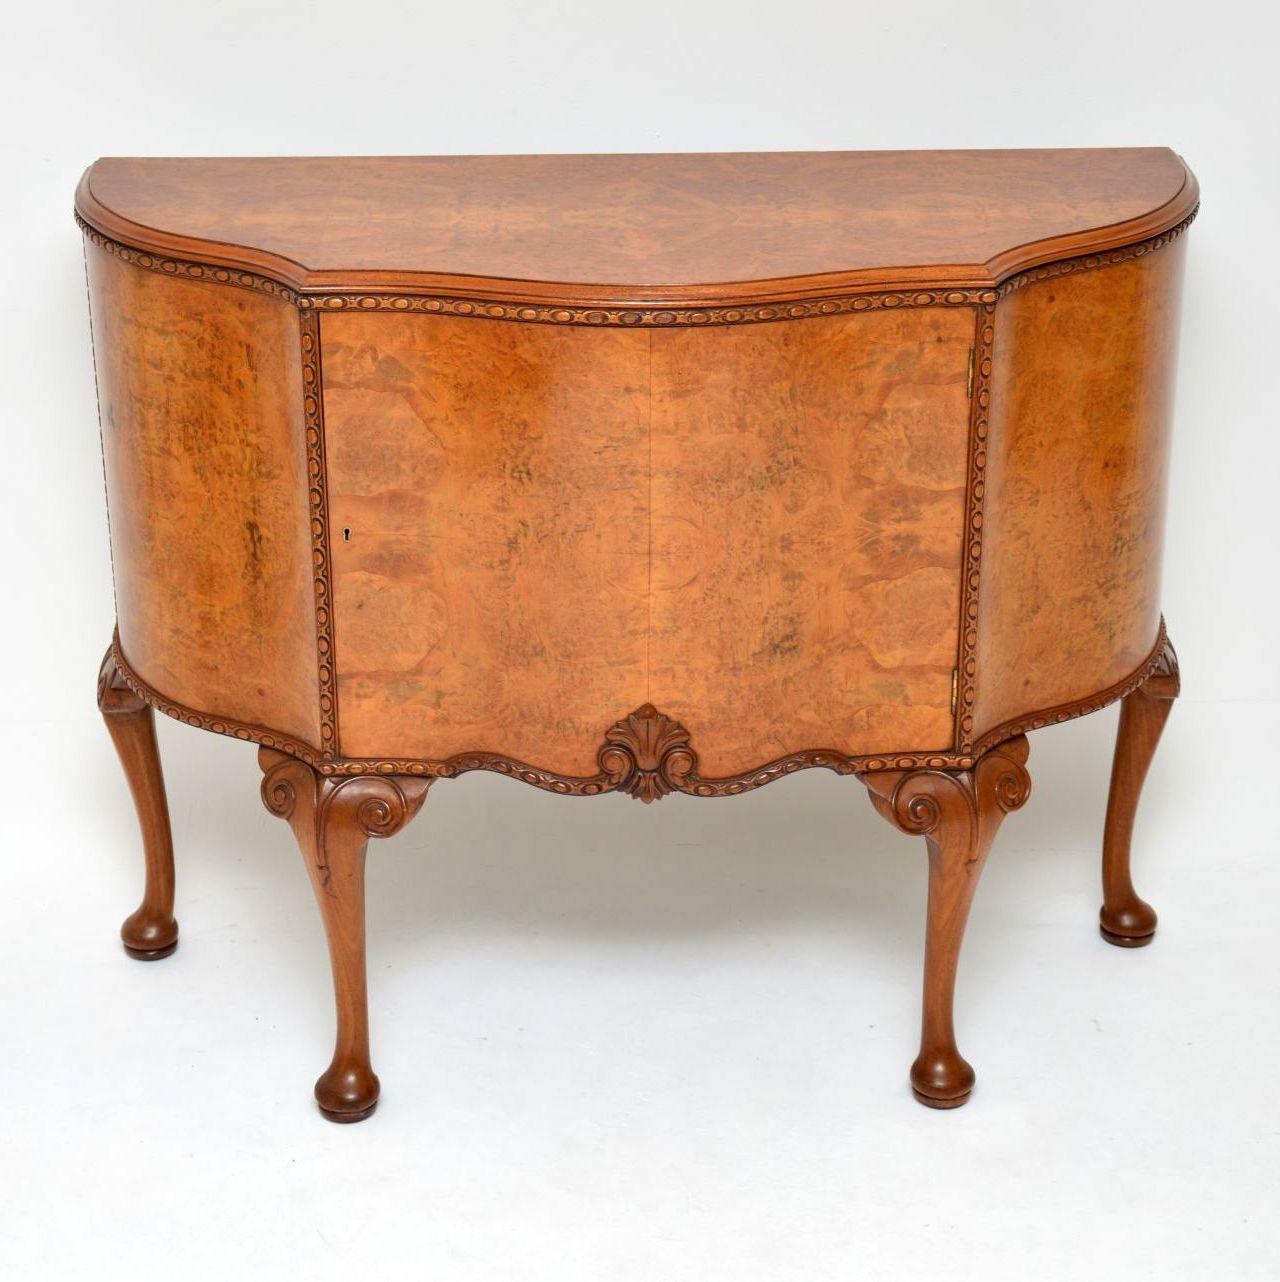 This antique Queen Anne style burr walnut cabinet has a wonderful warm mellow color and is in excellent condition, dating from the 1920s period. It has a serpentine shaped front with a single door cupboard and lots of storage inside. The top and the